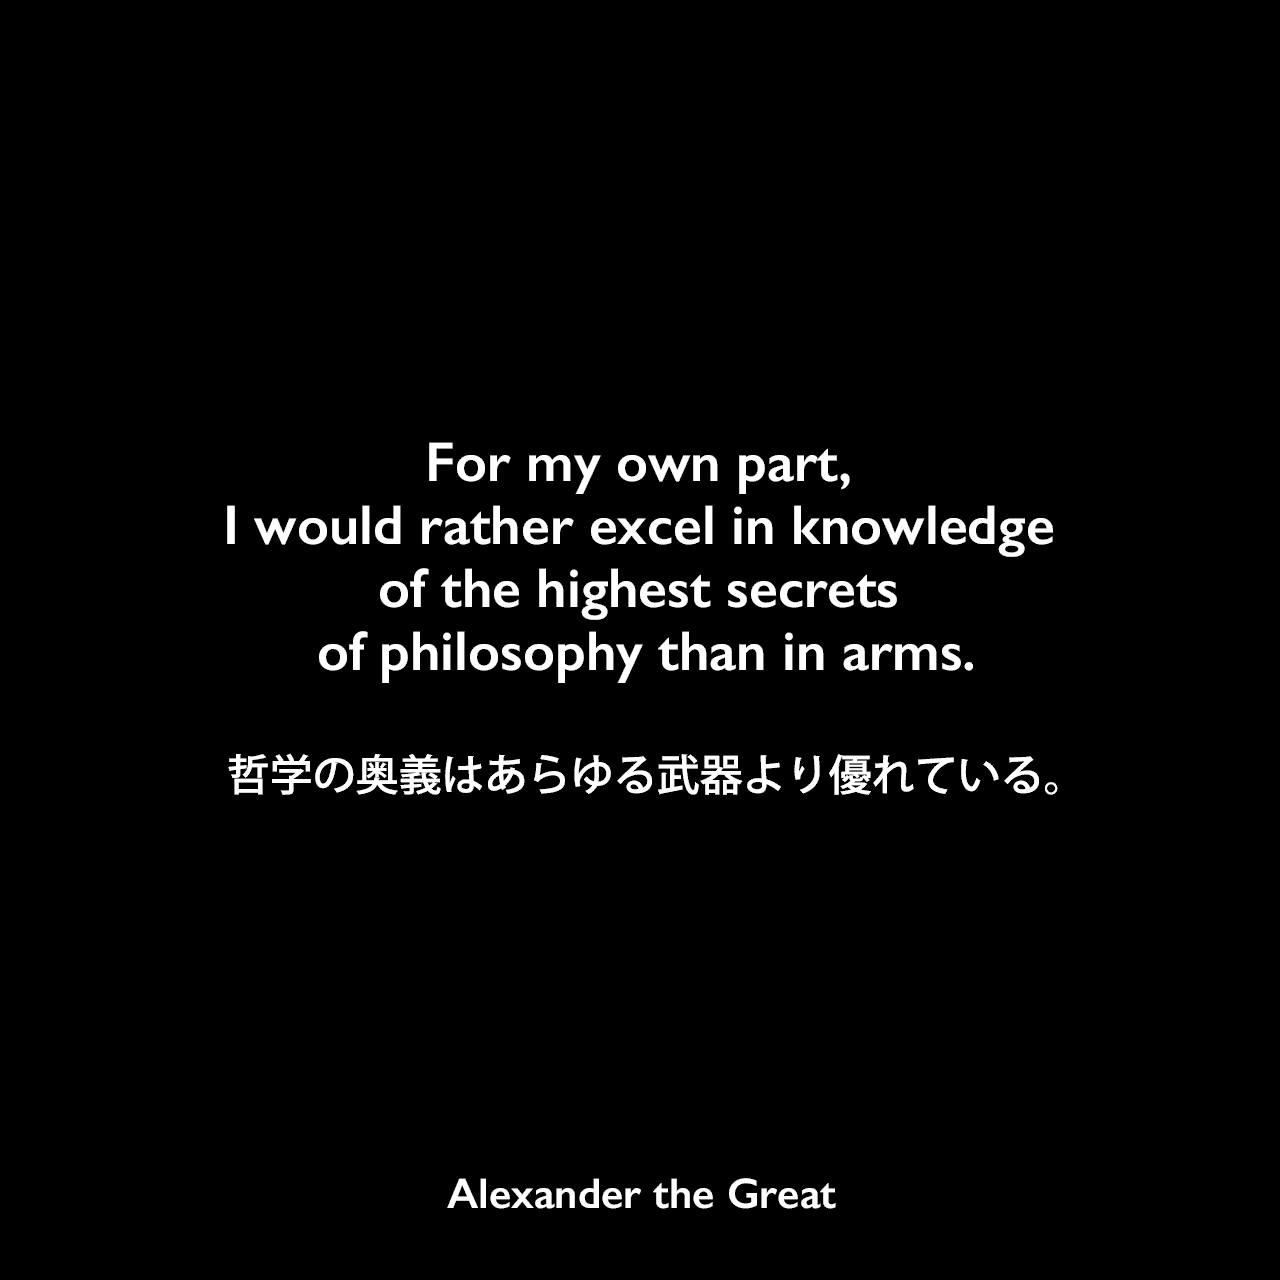 For my own part, I would rather excel in knowledge of the highest secrets of philosophy than in arms.哲学の奥義はあらゆる武器より優れている。Alexander the Great